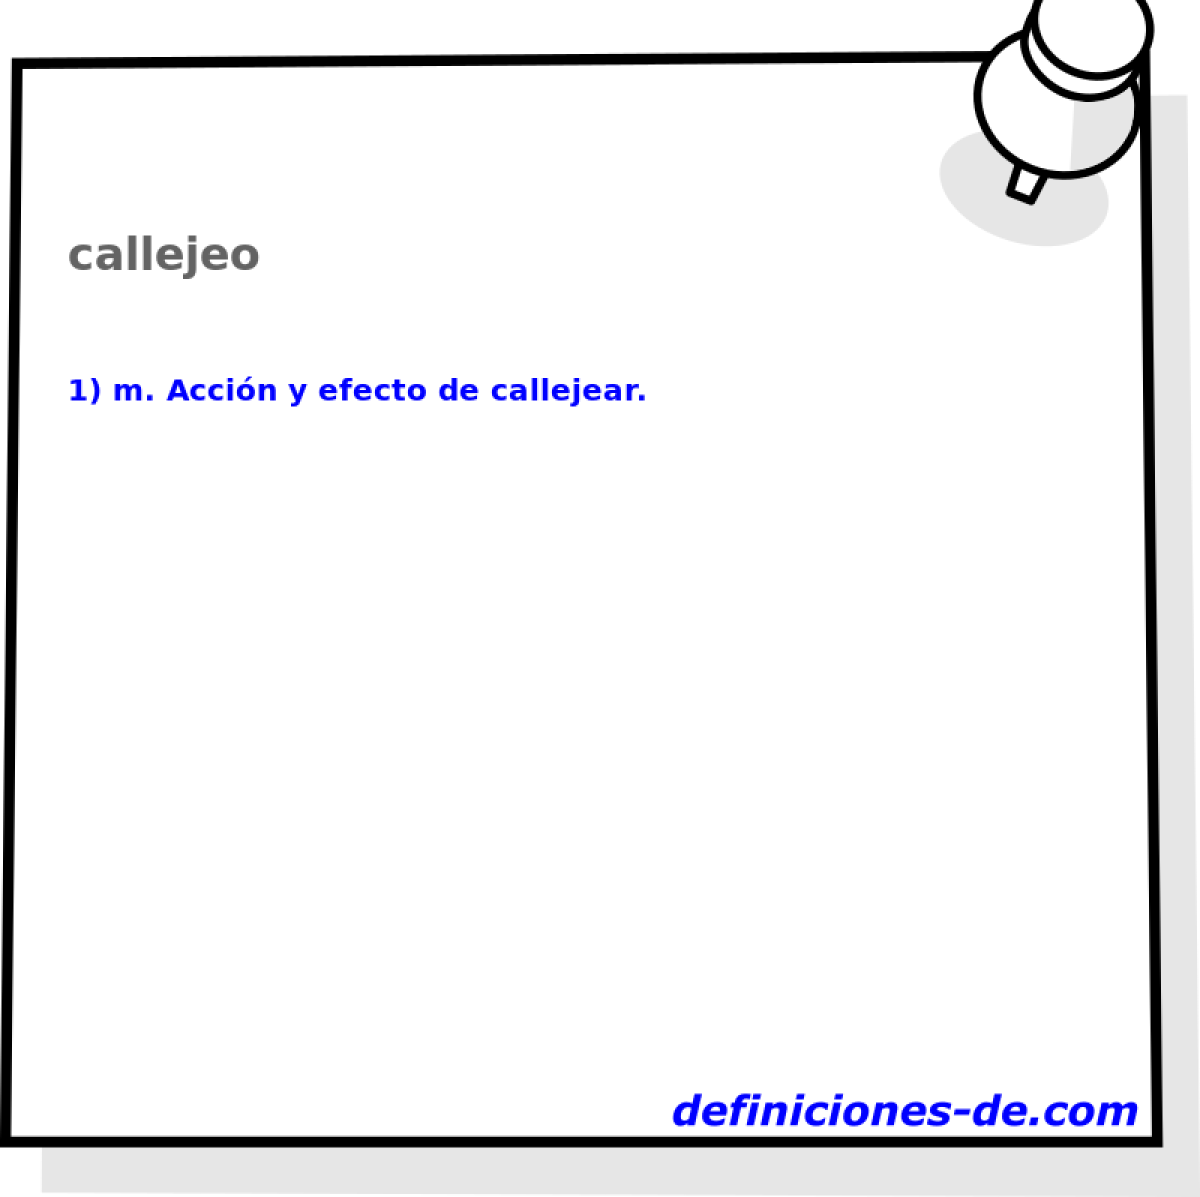 callejeo 